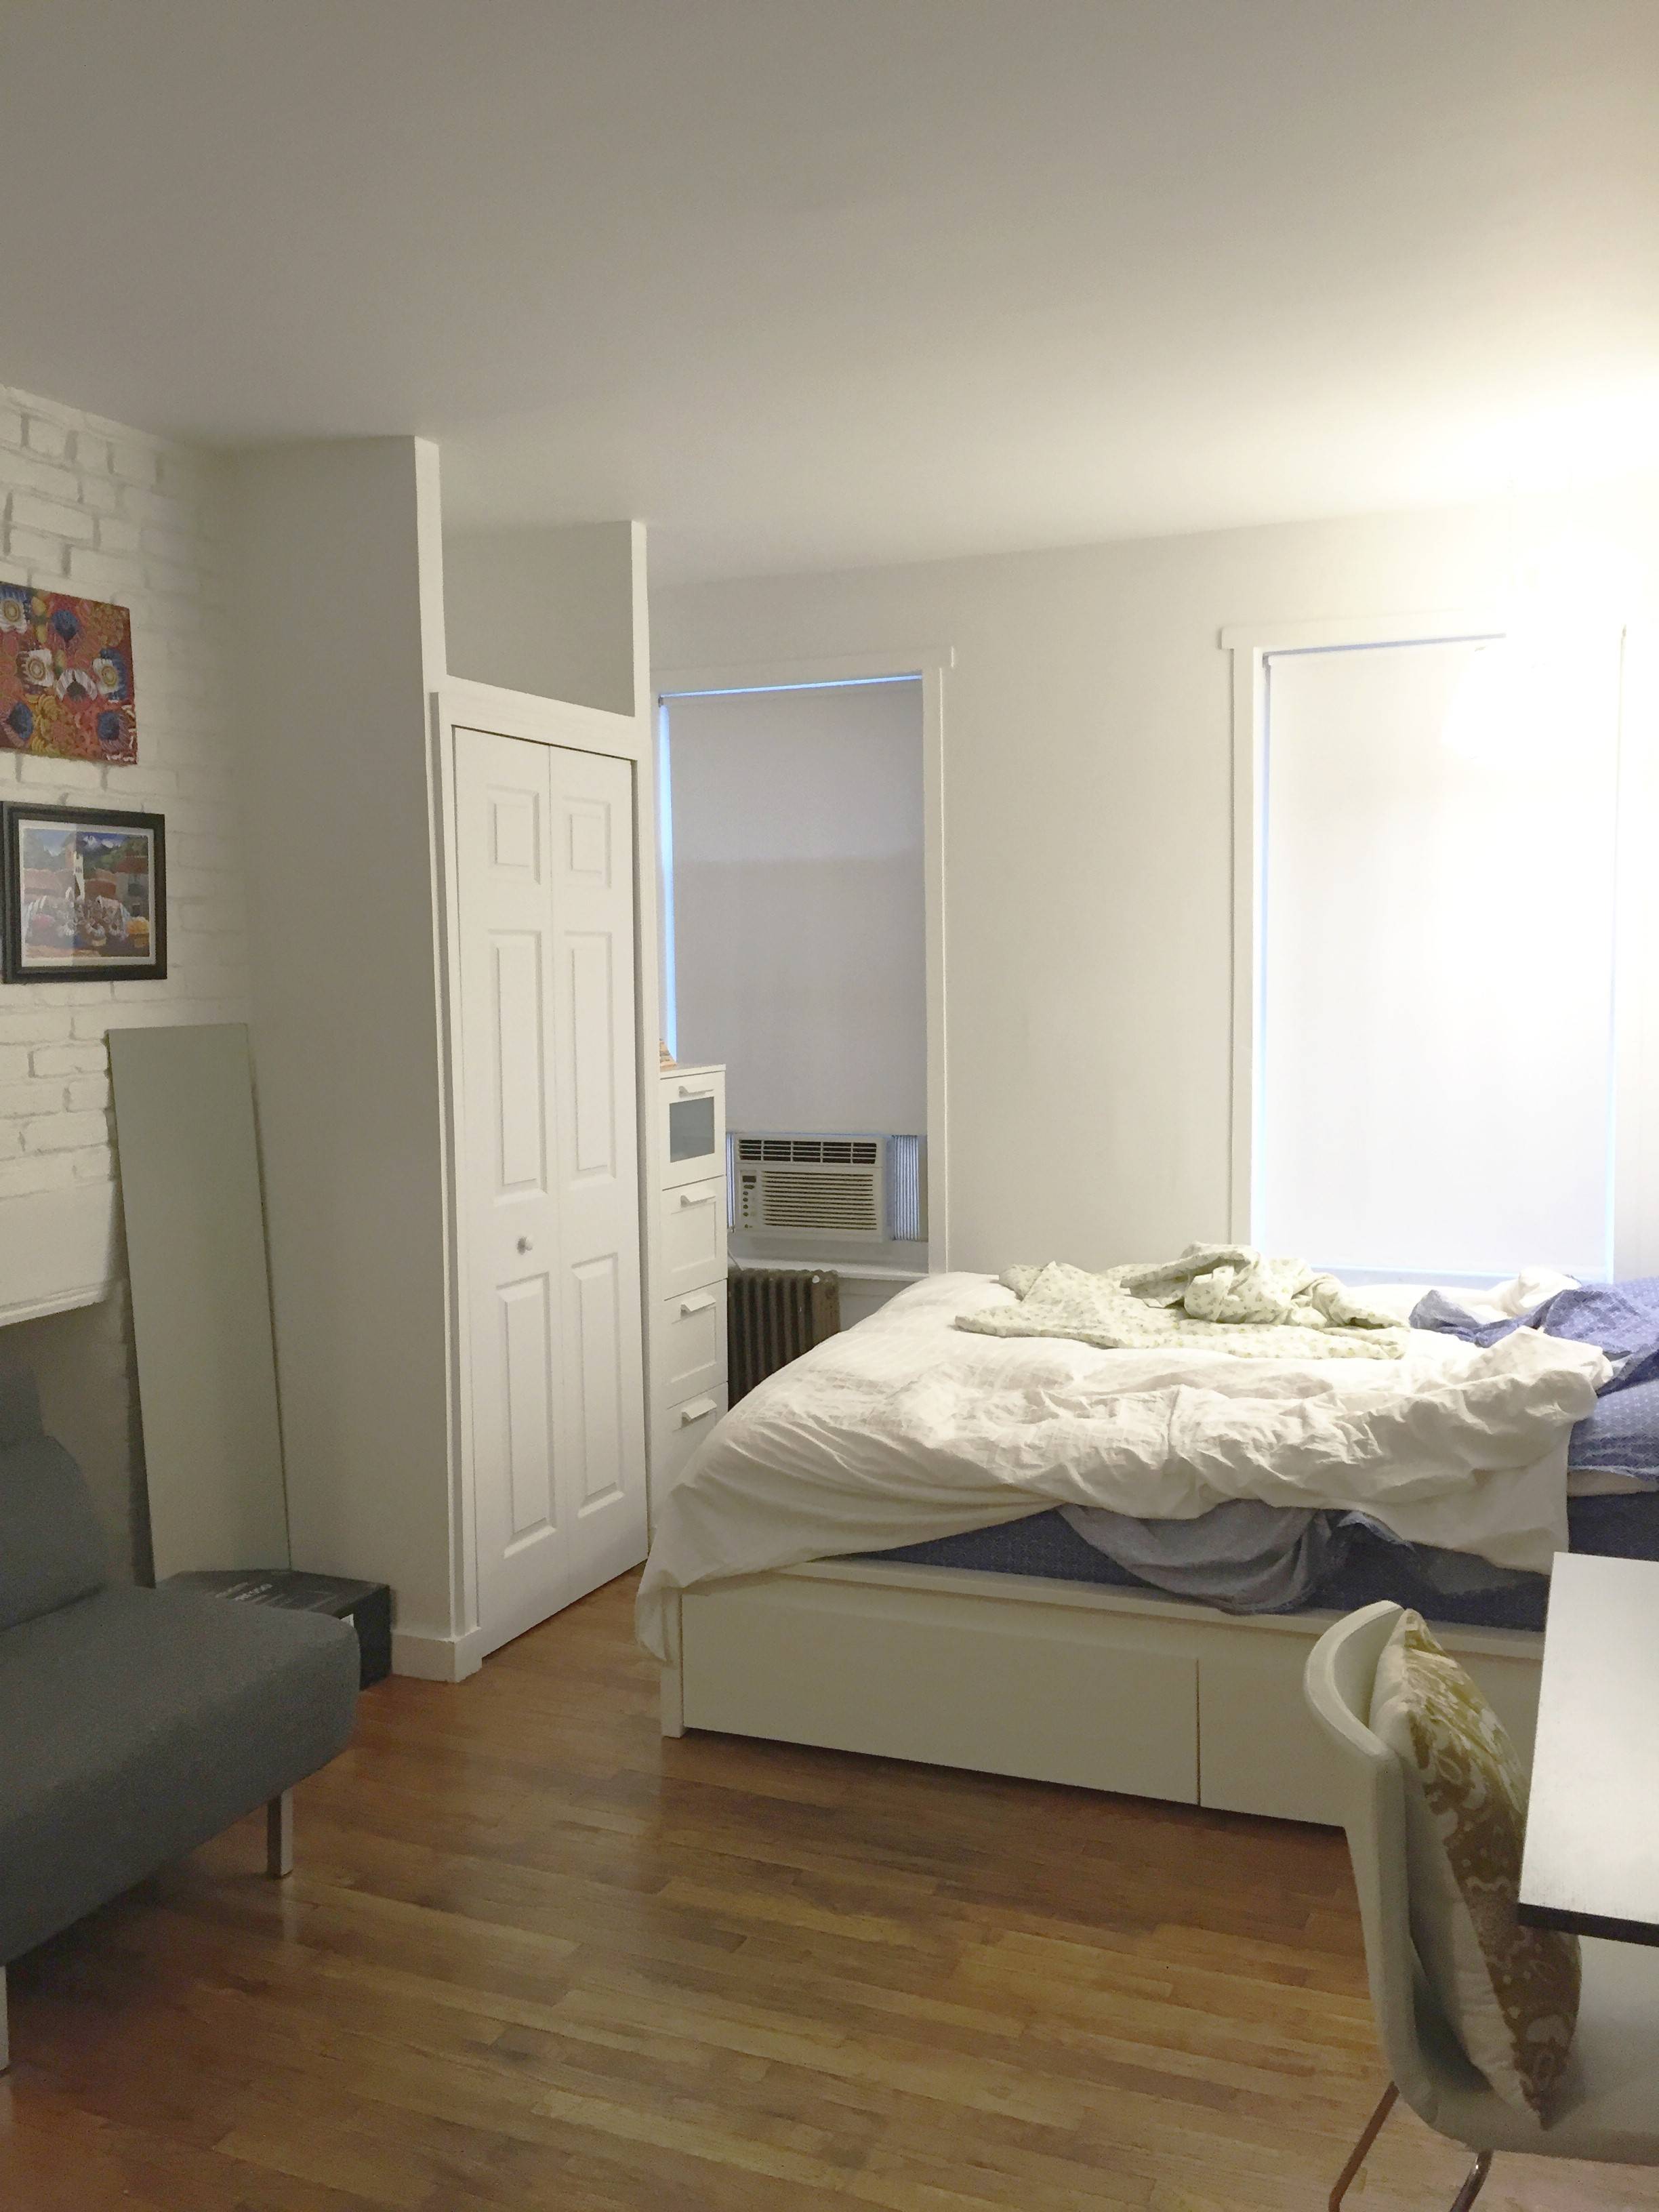 JUST REDUCED and BEST PRICED Beautifully Renovated Studio w/ Outdoor Space